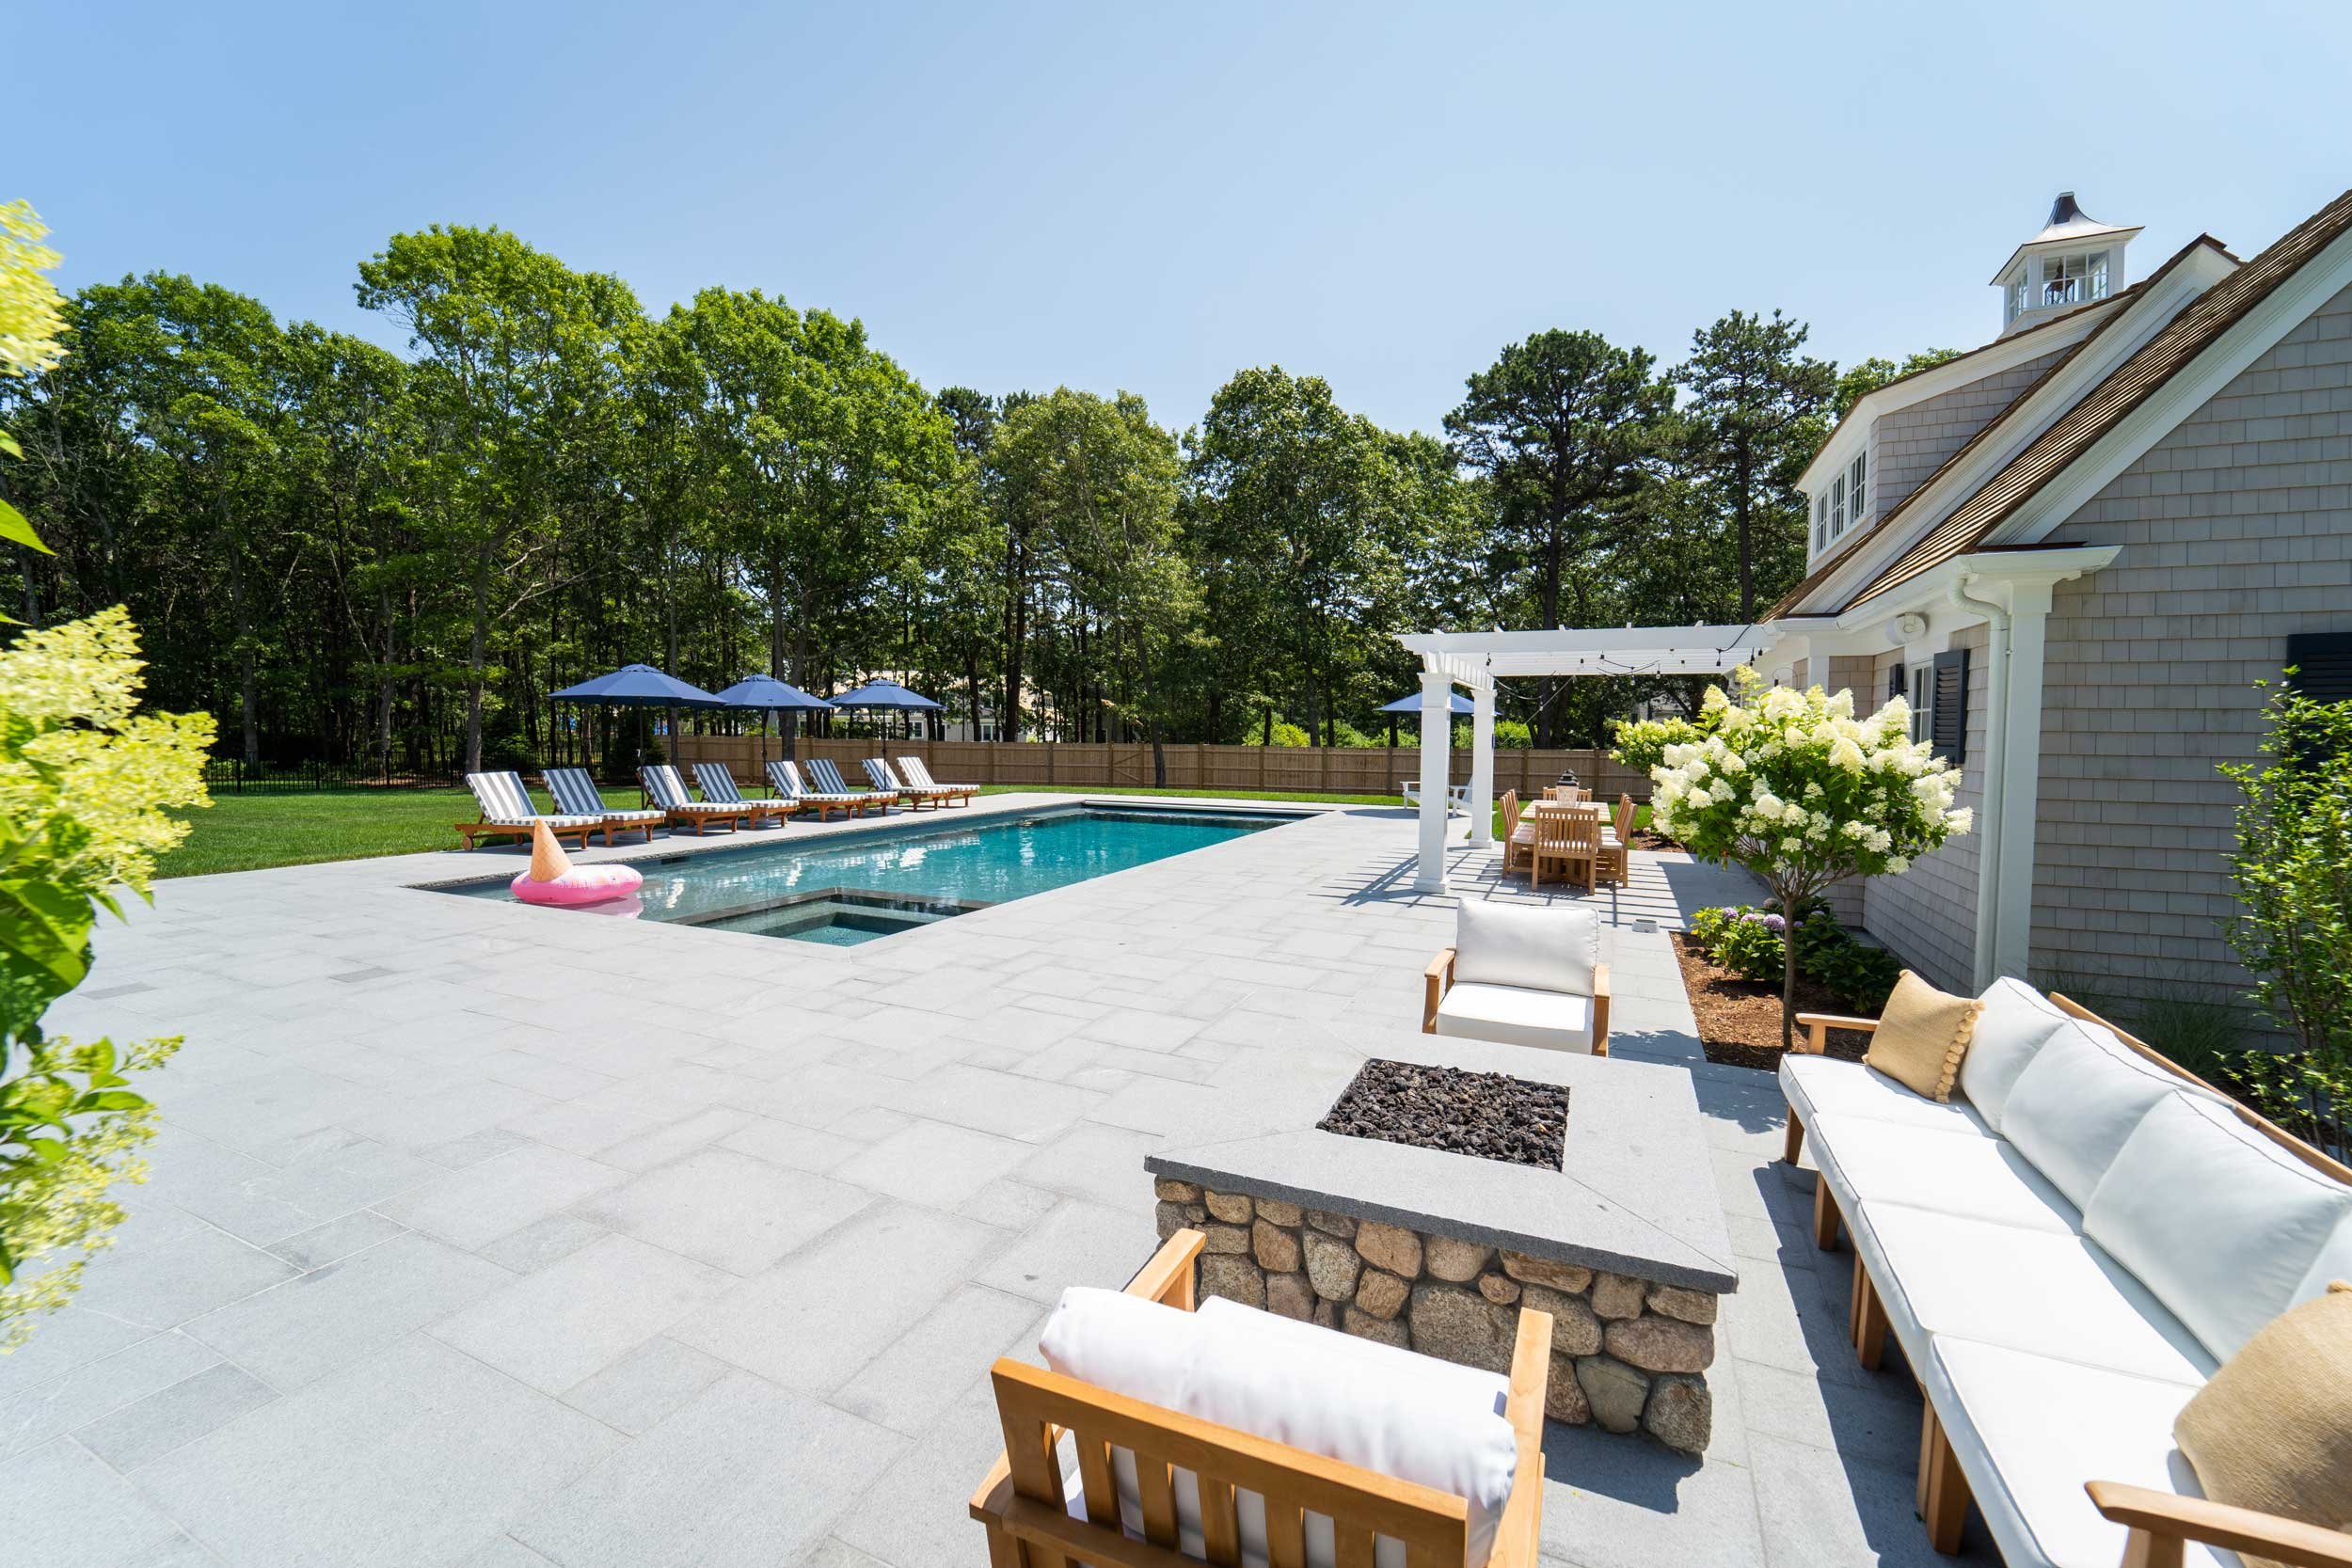 james-golden-oyster-harbors-family-compound-pool-cabana-pergola-fire-pit-spa.jpg